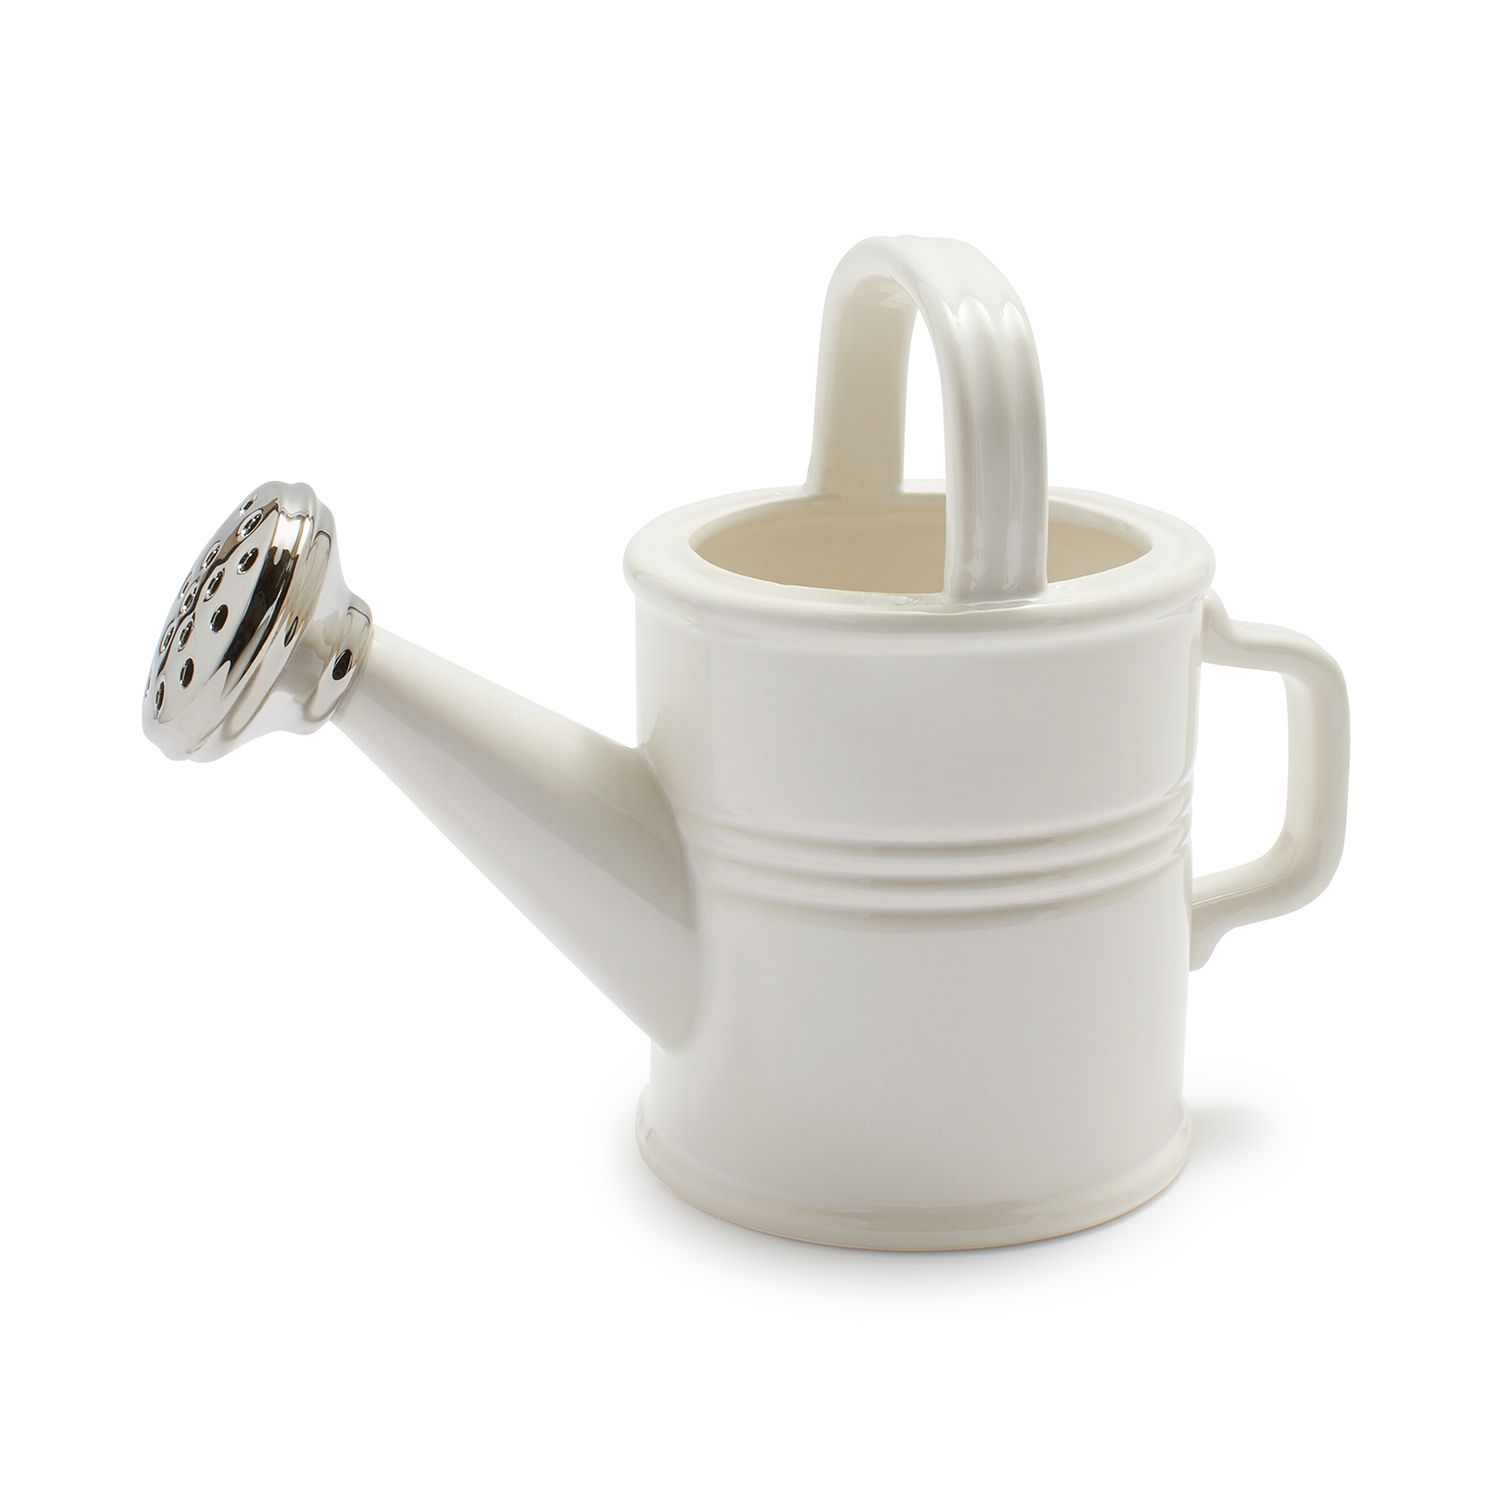 Two’s Company Ceramic Watering Can, 6.5" | Sur La Table